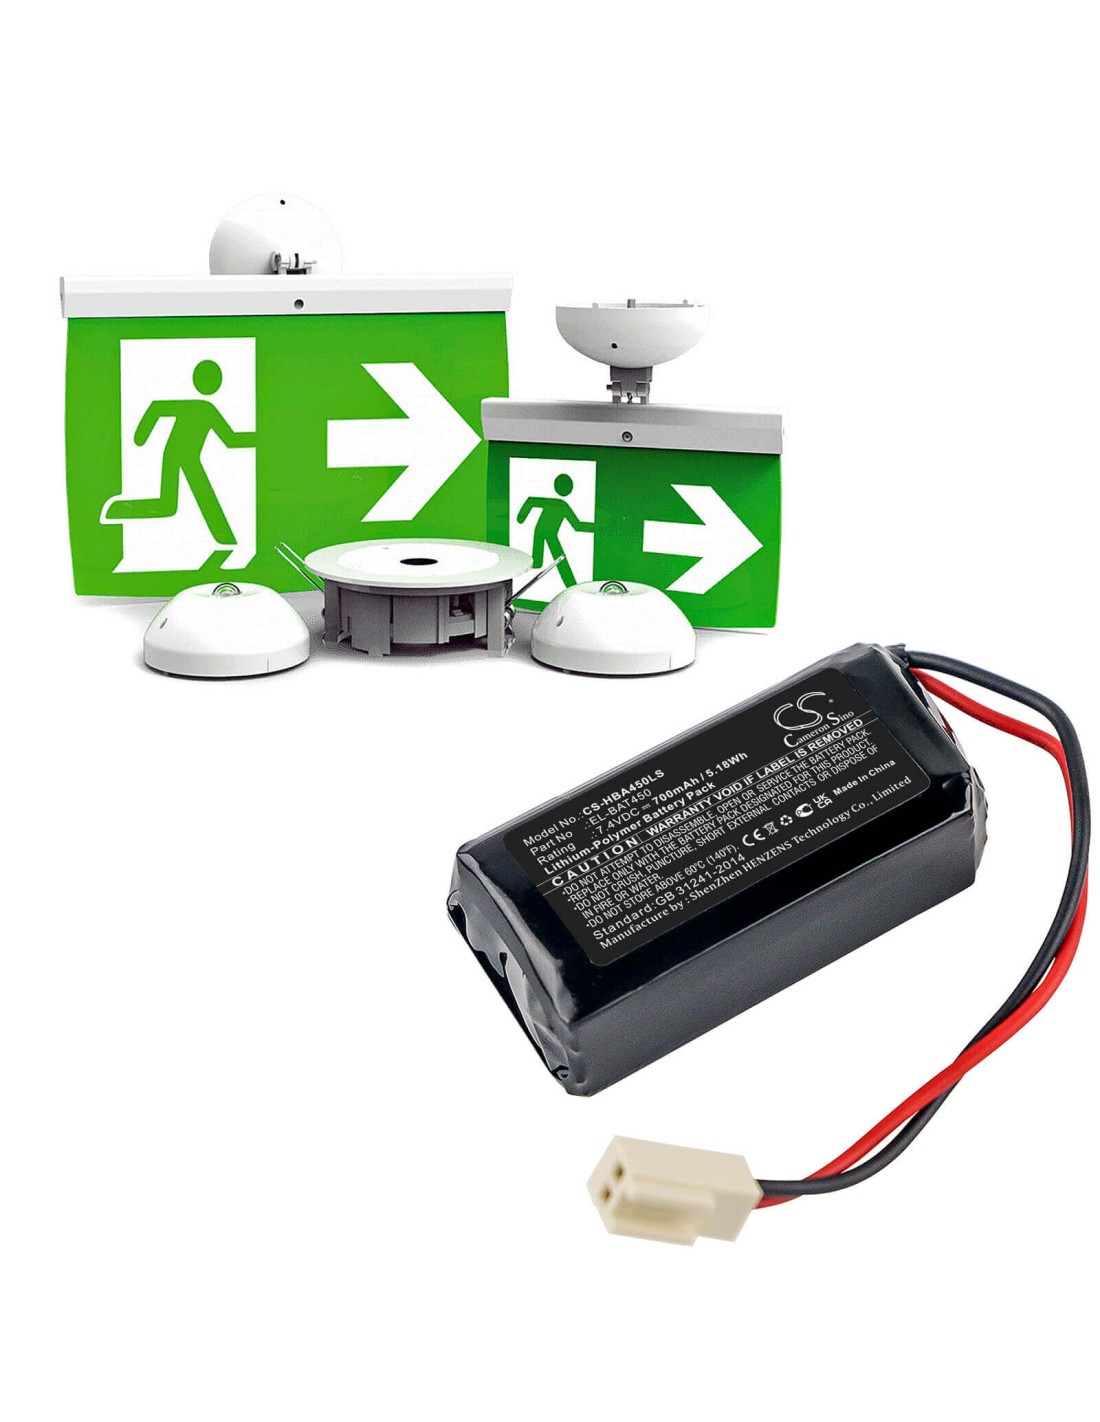 7.4V, Li-Polymer, 700mAh, Battery fits Hochiki, Exit Signs, Firescape Luminaires, 5.18Wh